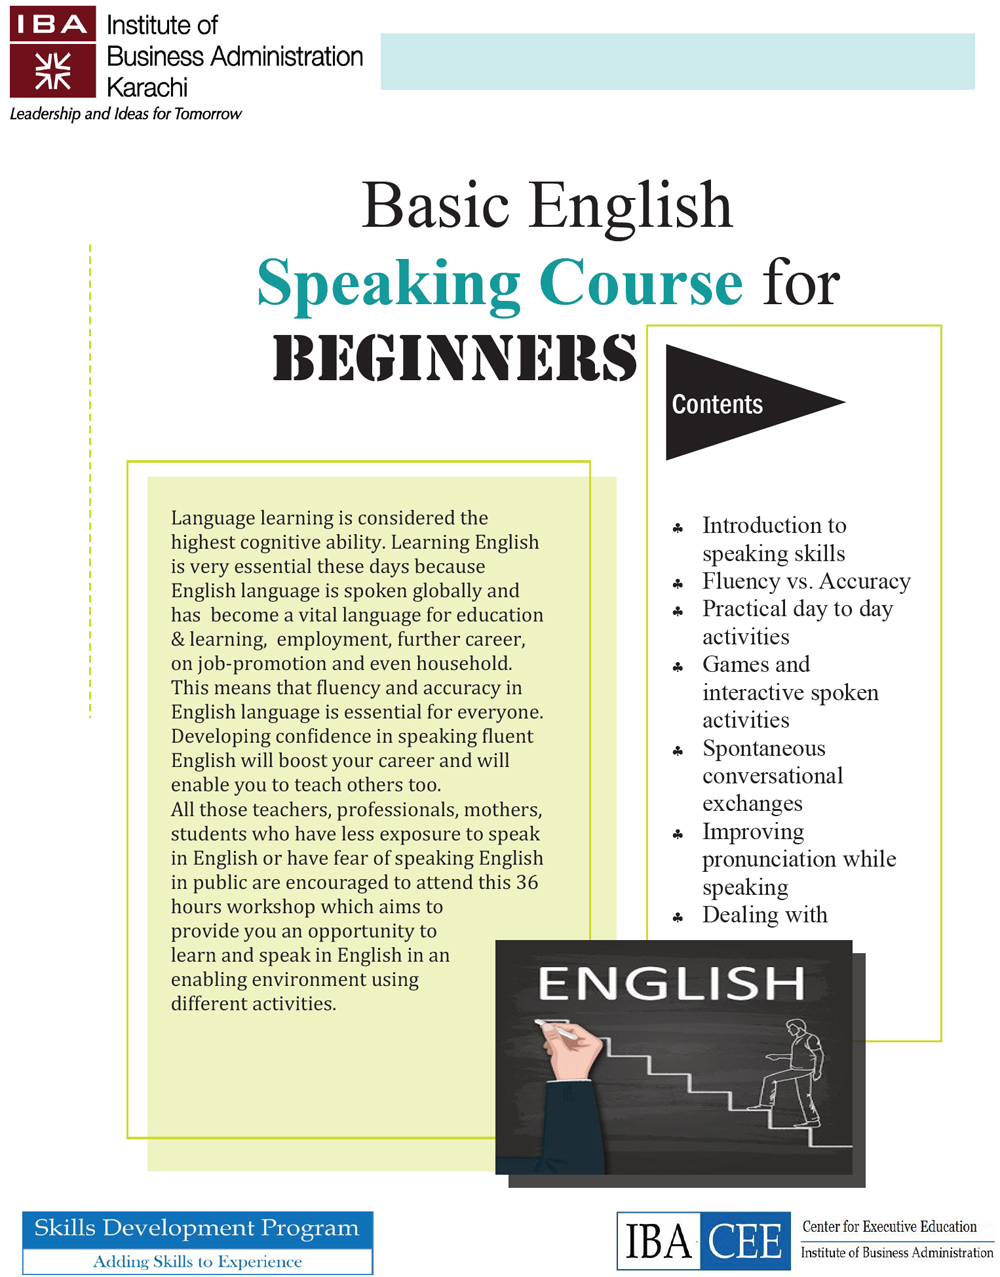 English language course for beginners